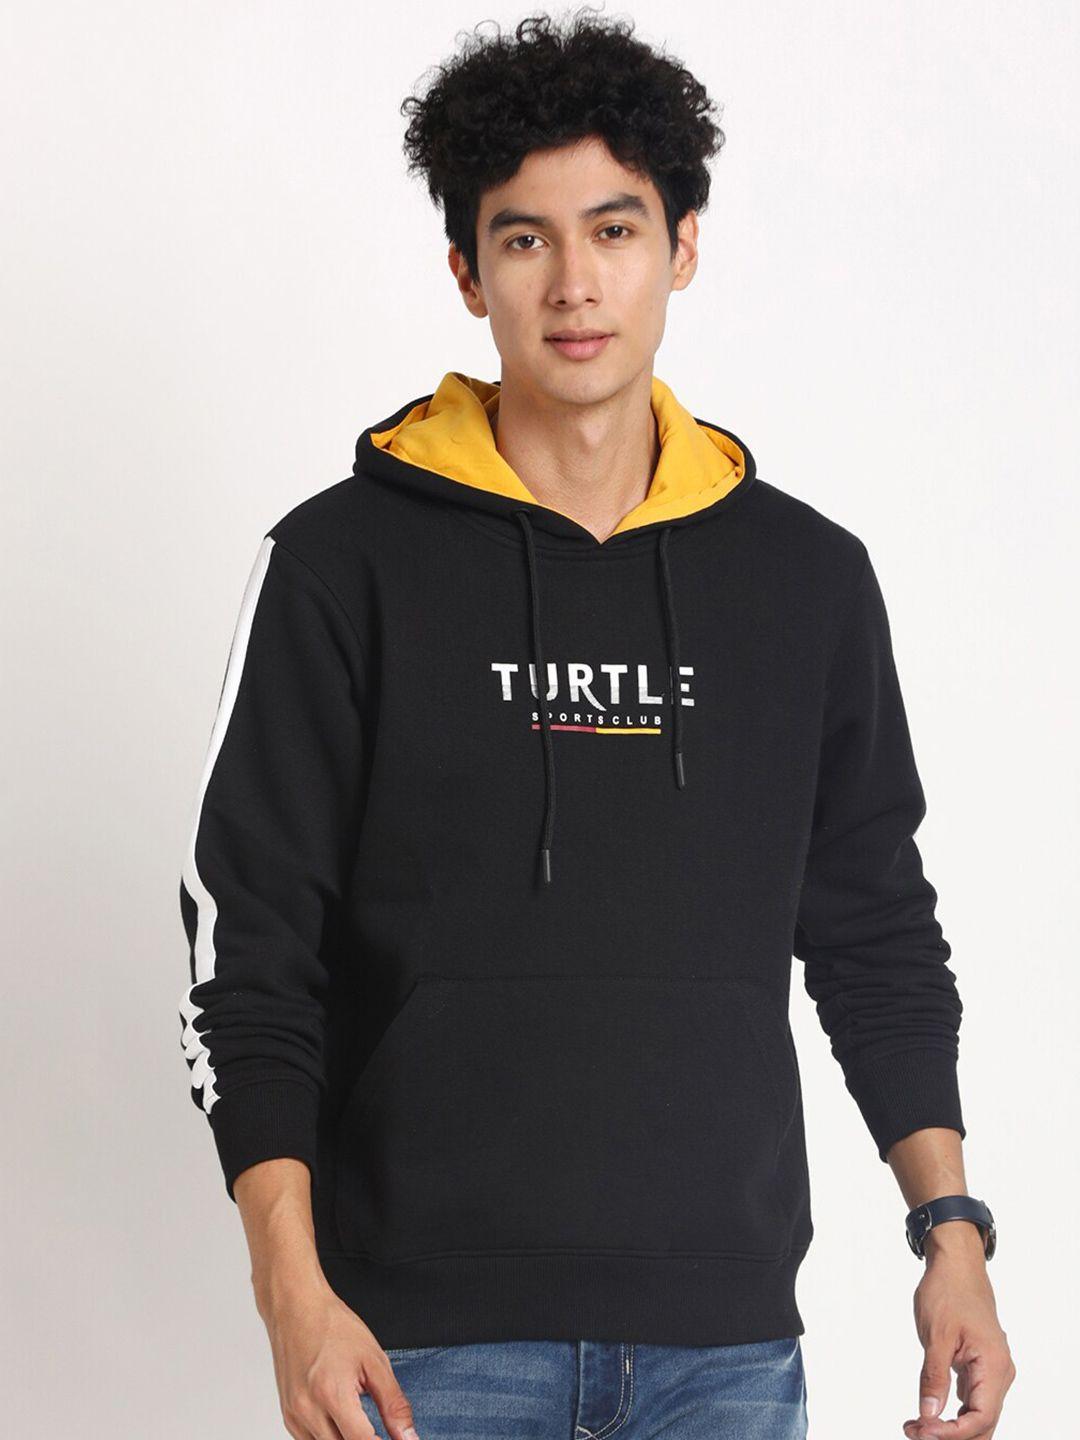 turtle typography printed hooded cotton pullover sweatshirt